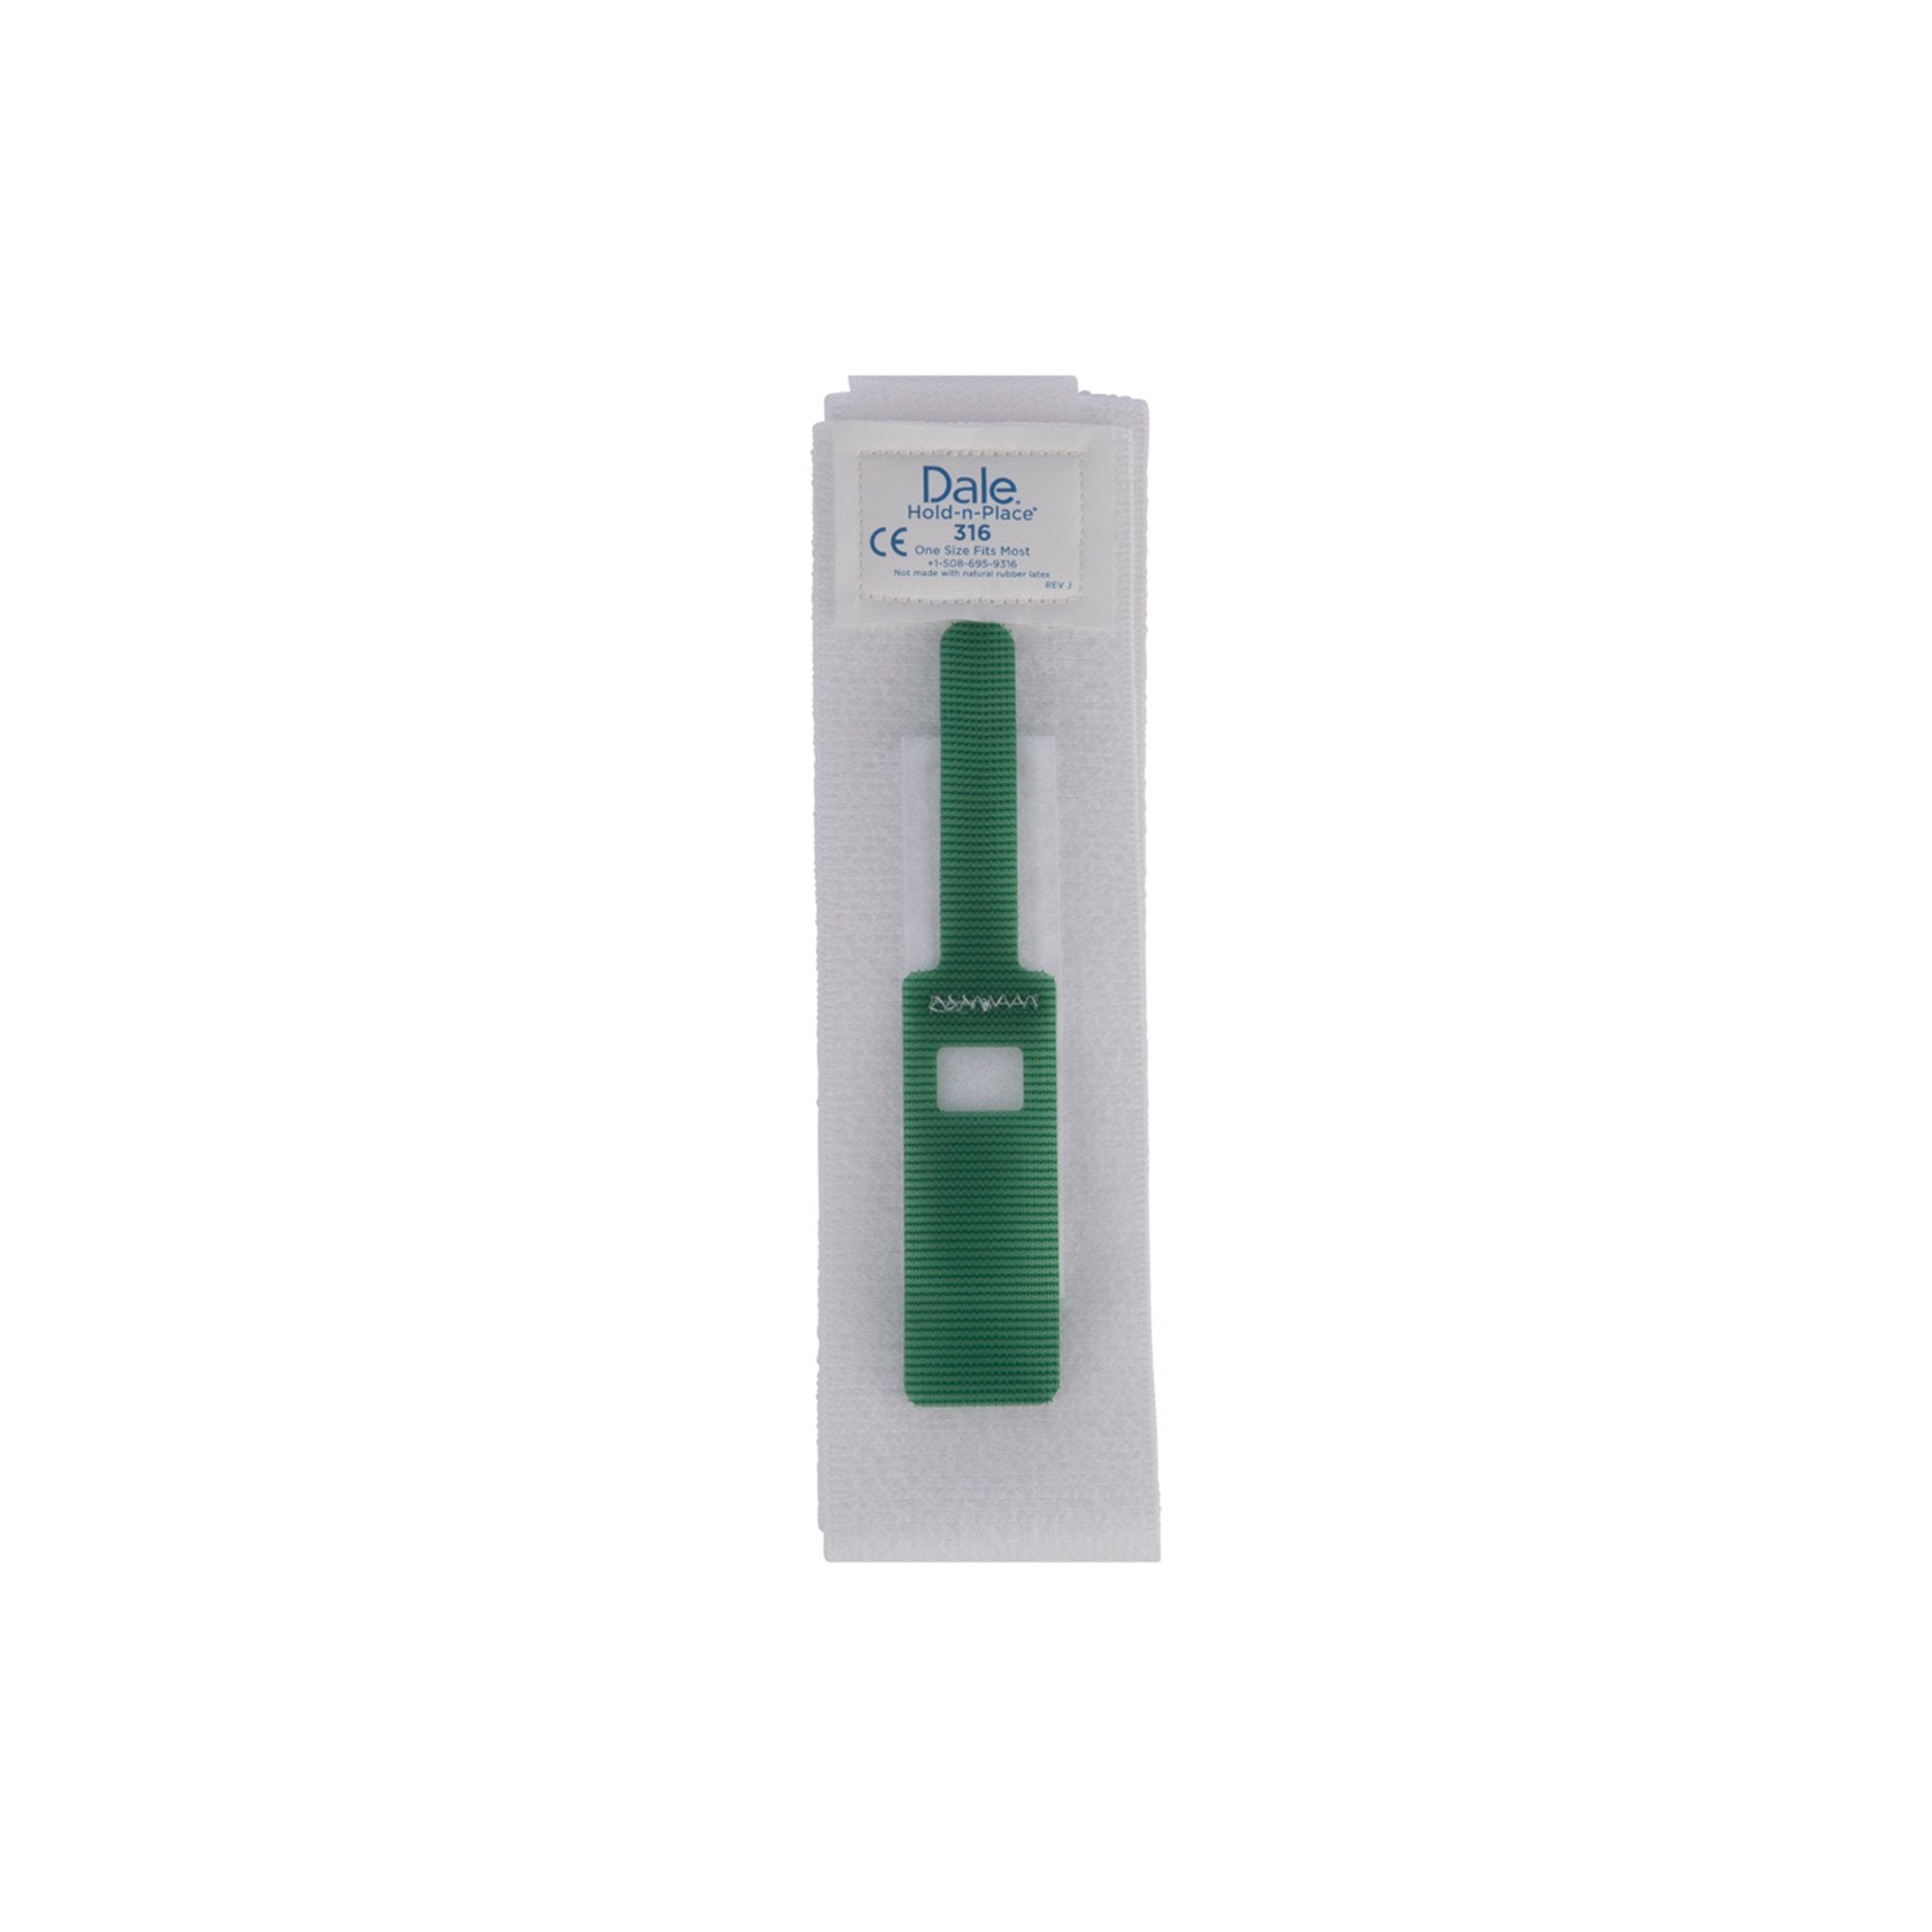 Foley Catheter Holder Hold-N-Place 2 Inch Wide, Exclusive Stretch Material, Velcro Fastener